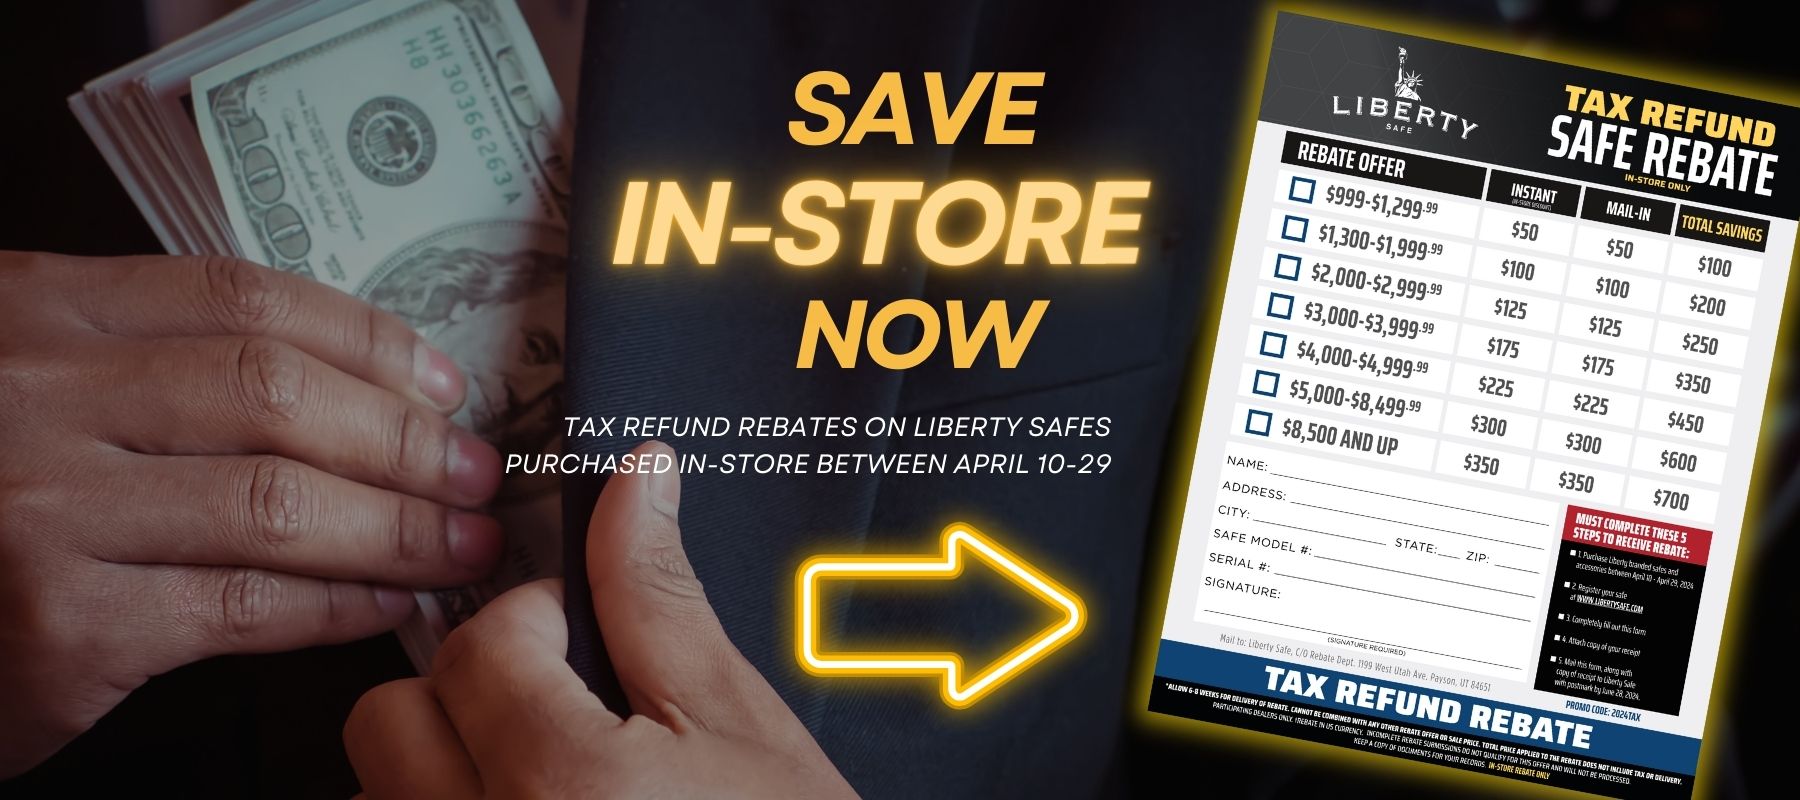 Liberty safe Tax Refund Rebate on In-Store Purchases.